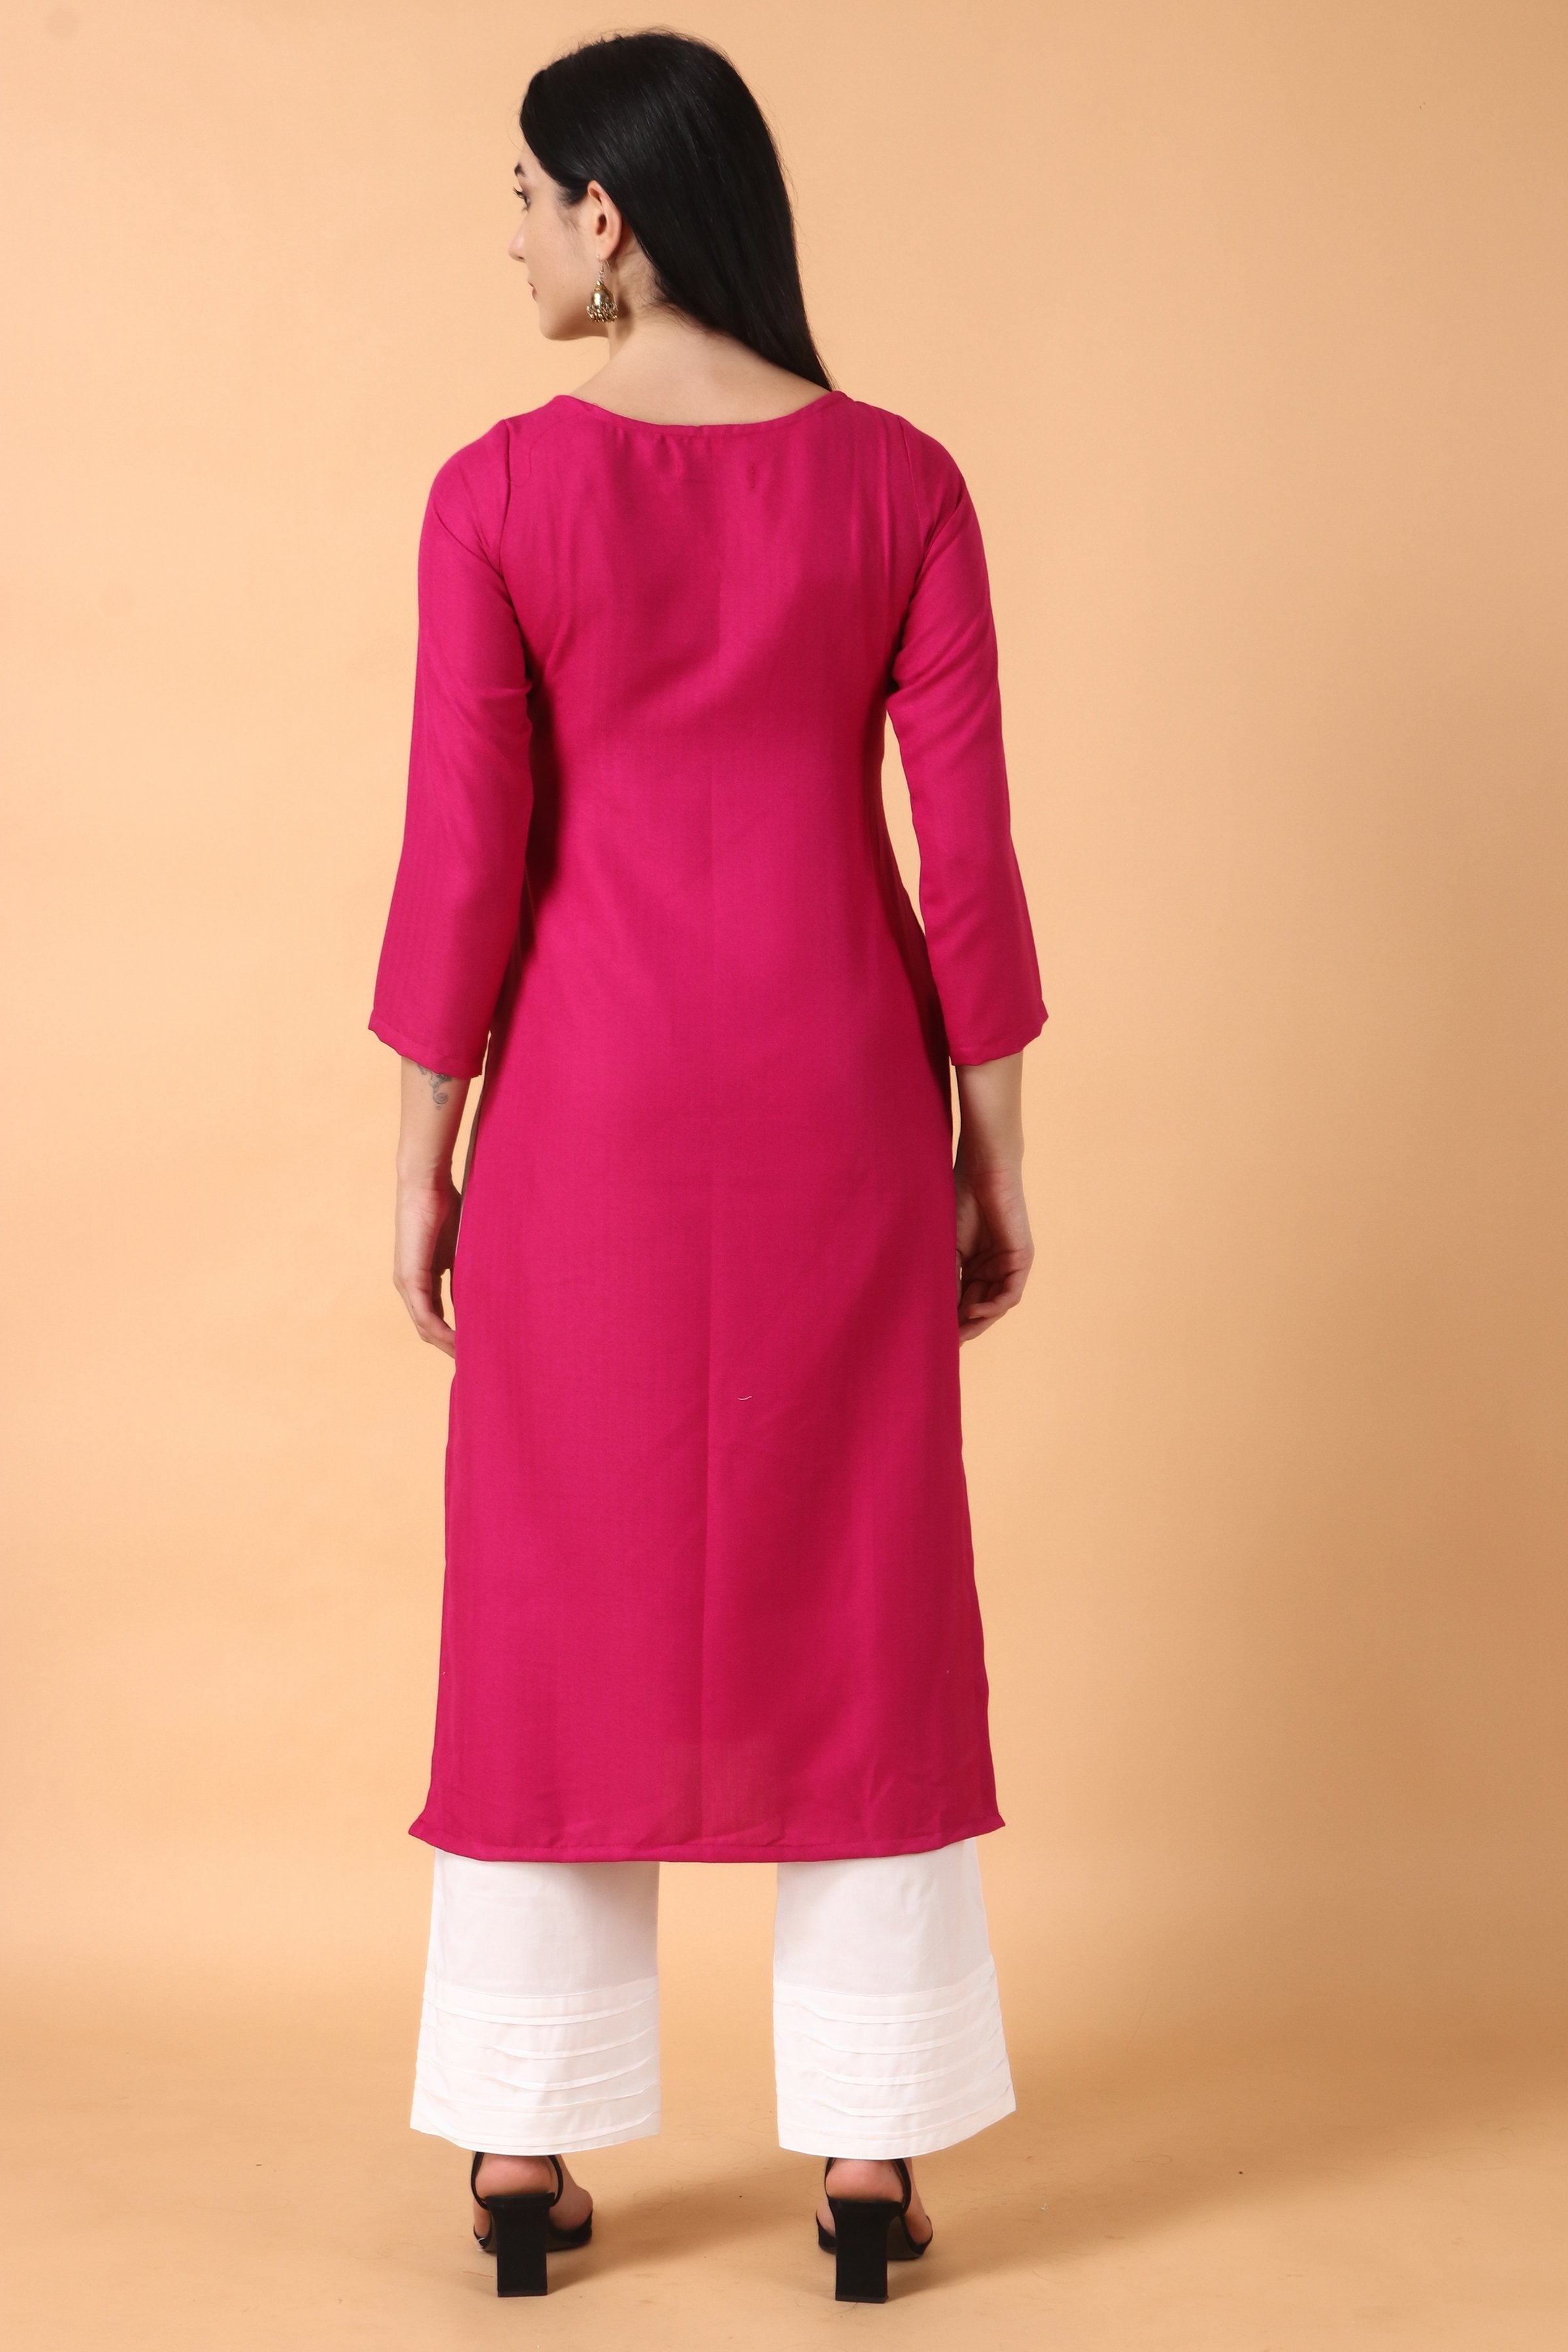 Buy Kamla Ladies Fashion - Women Woolen Kurti for Women Check Design V Neck  Colour Red Full Sleeves Free Size at Amazon.in